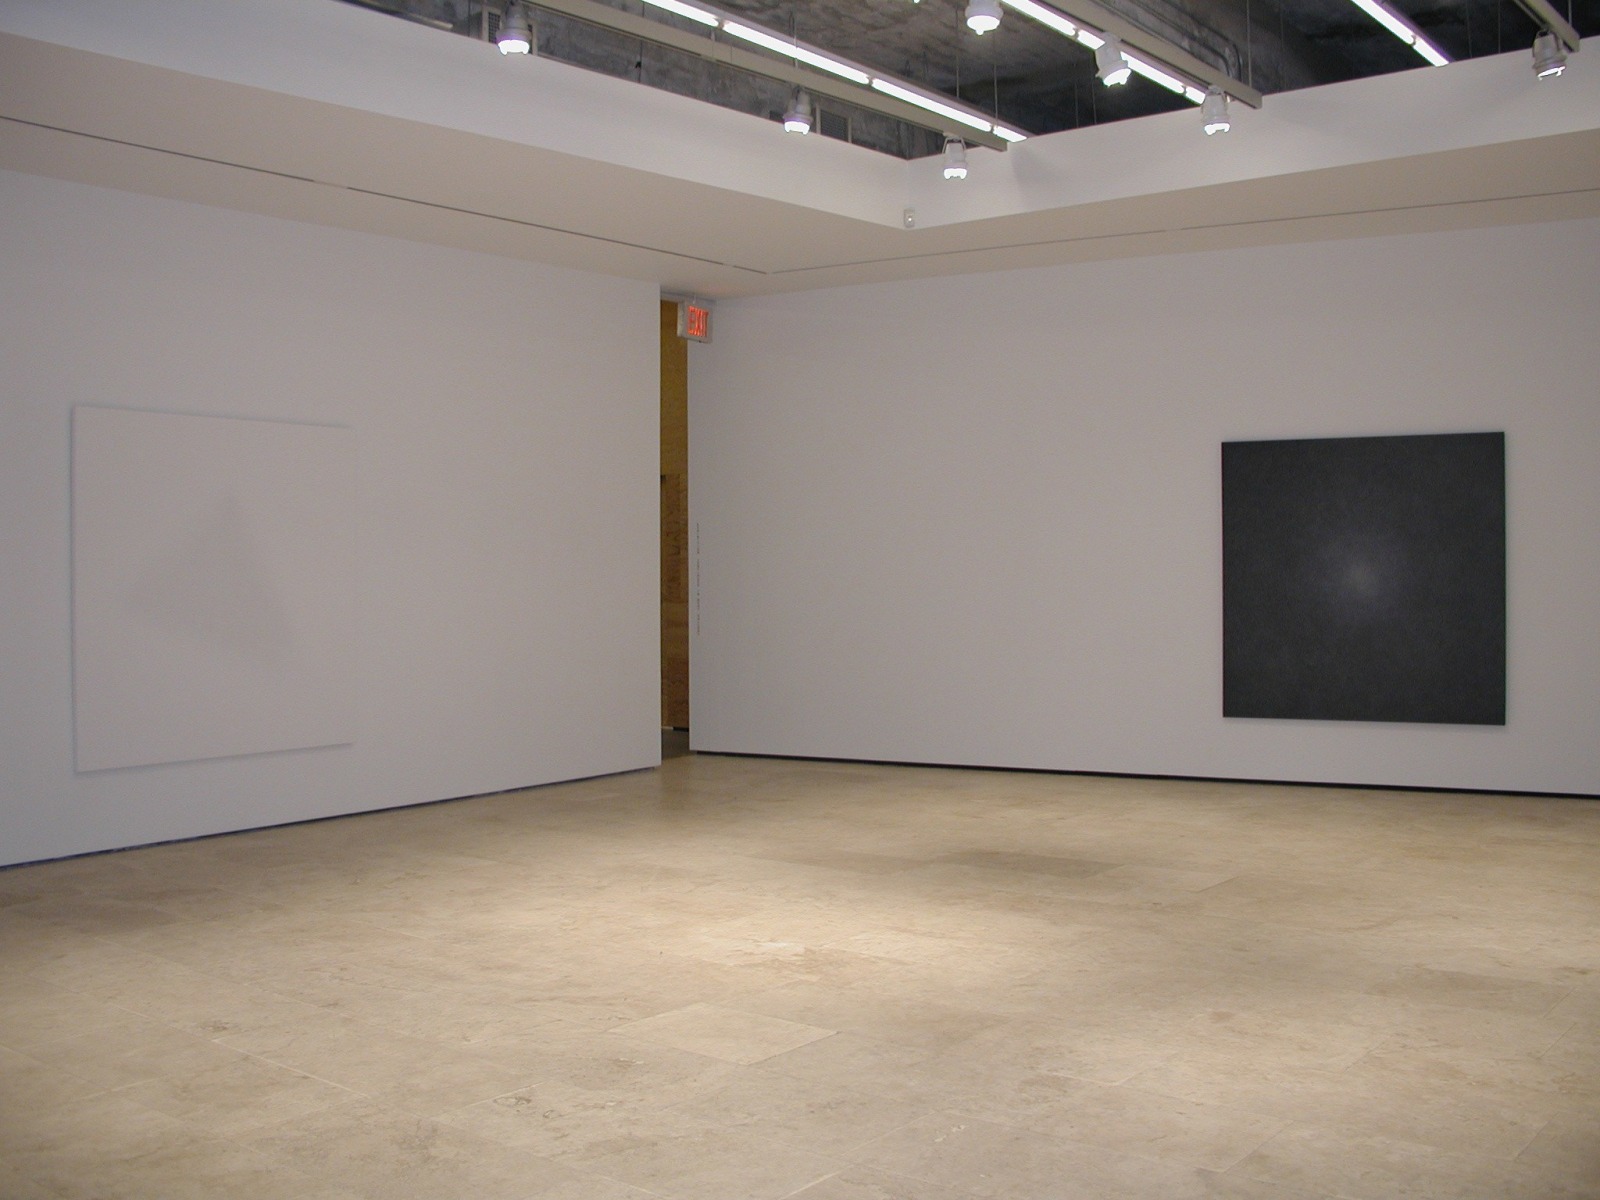 Installation view of Shirazeh Houshiary exhibition in 2003 at Lehmann Maupin in New York, view 1